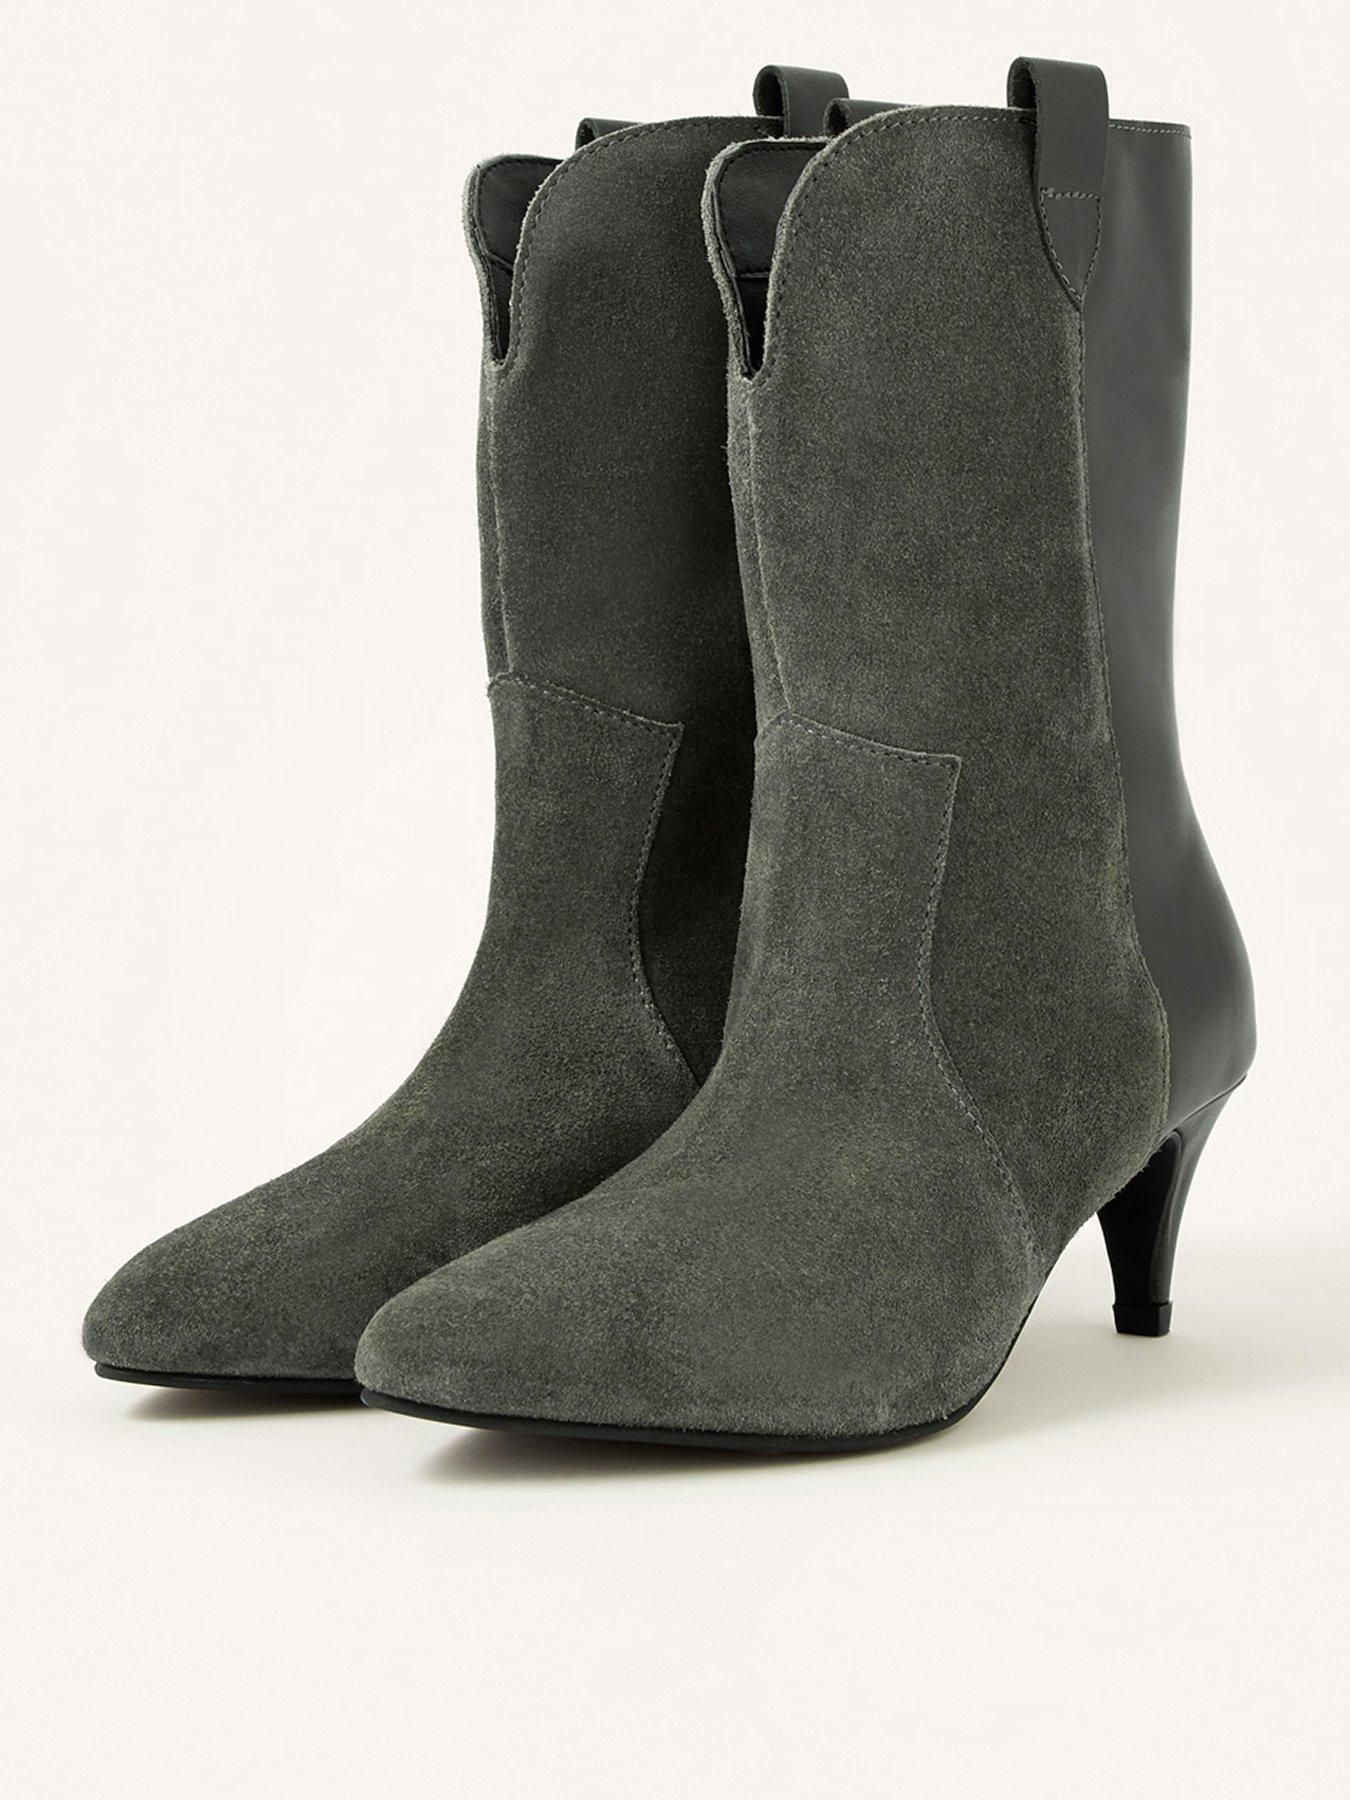 Shoes & boots Winnie Western Mid Calf Boot - Grey